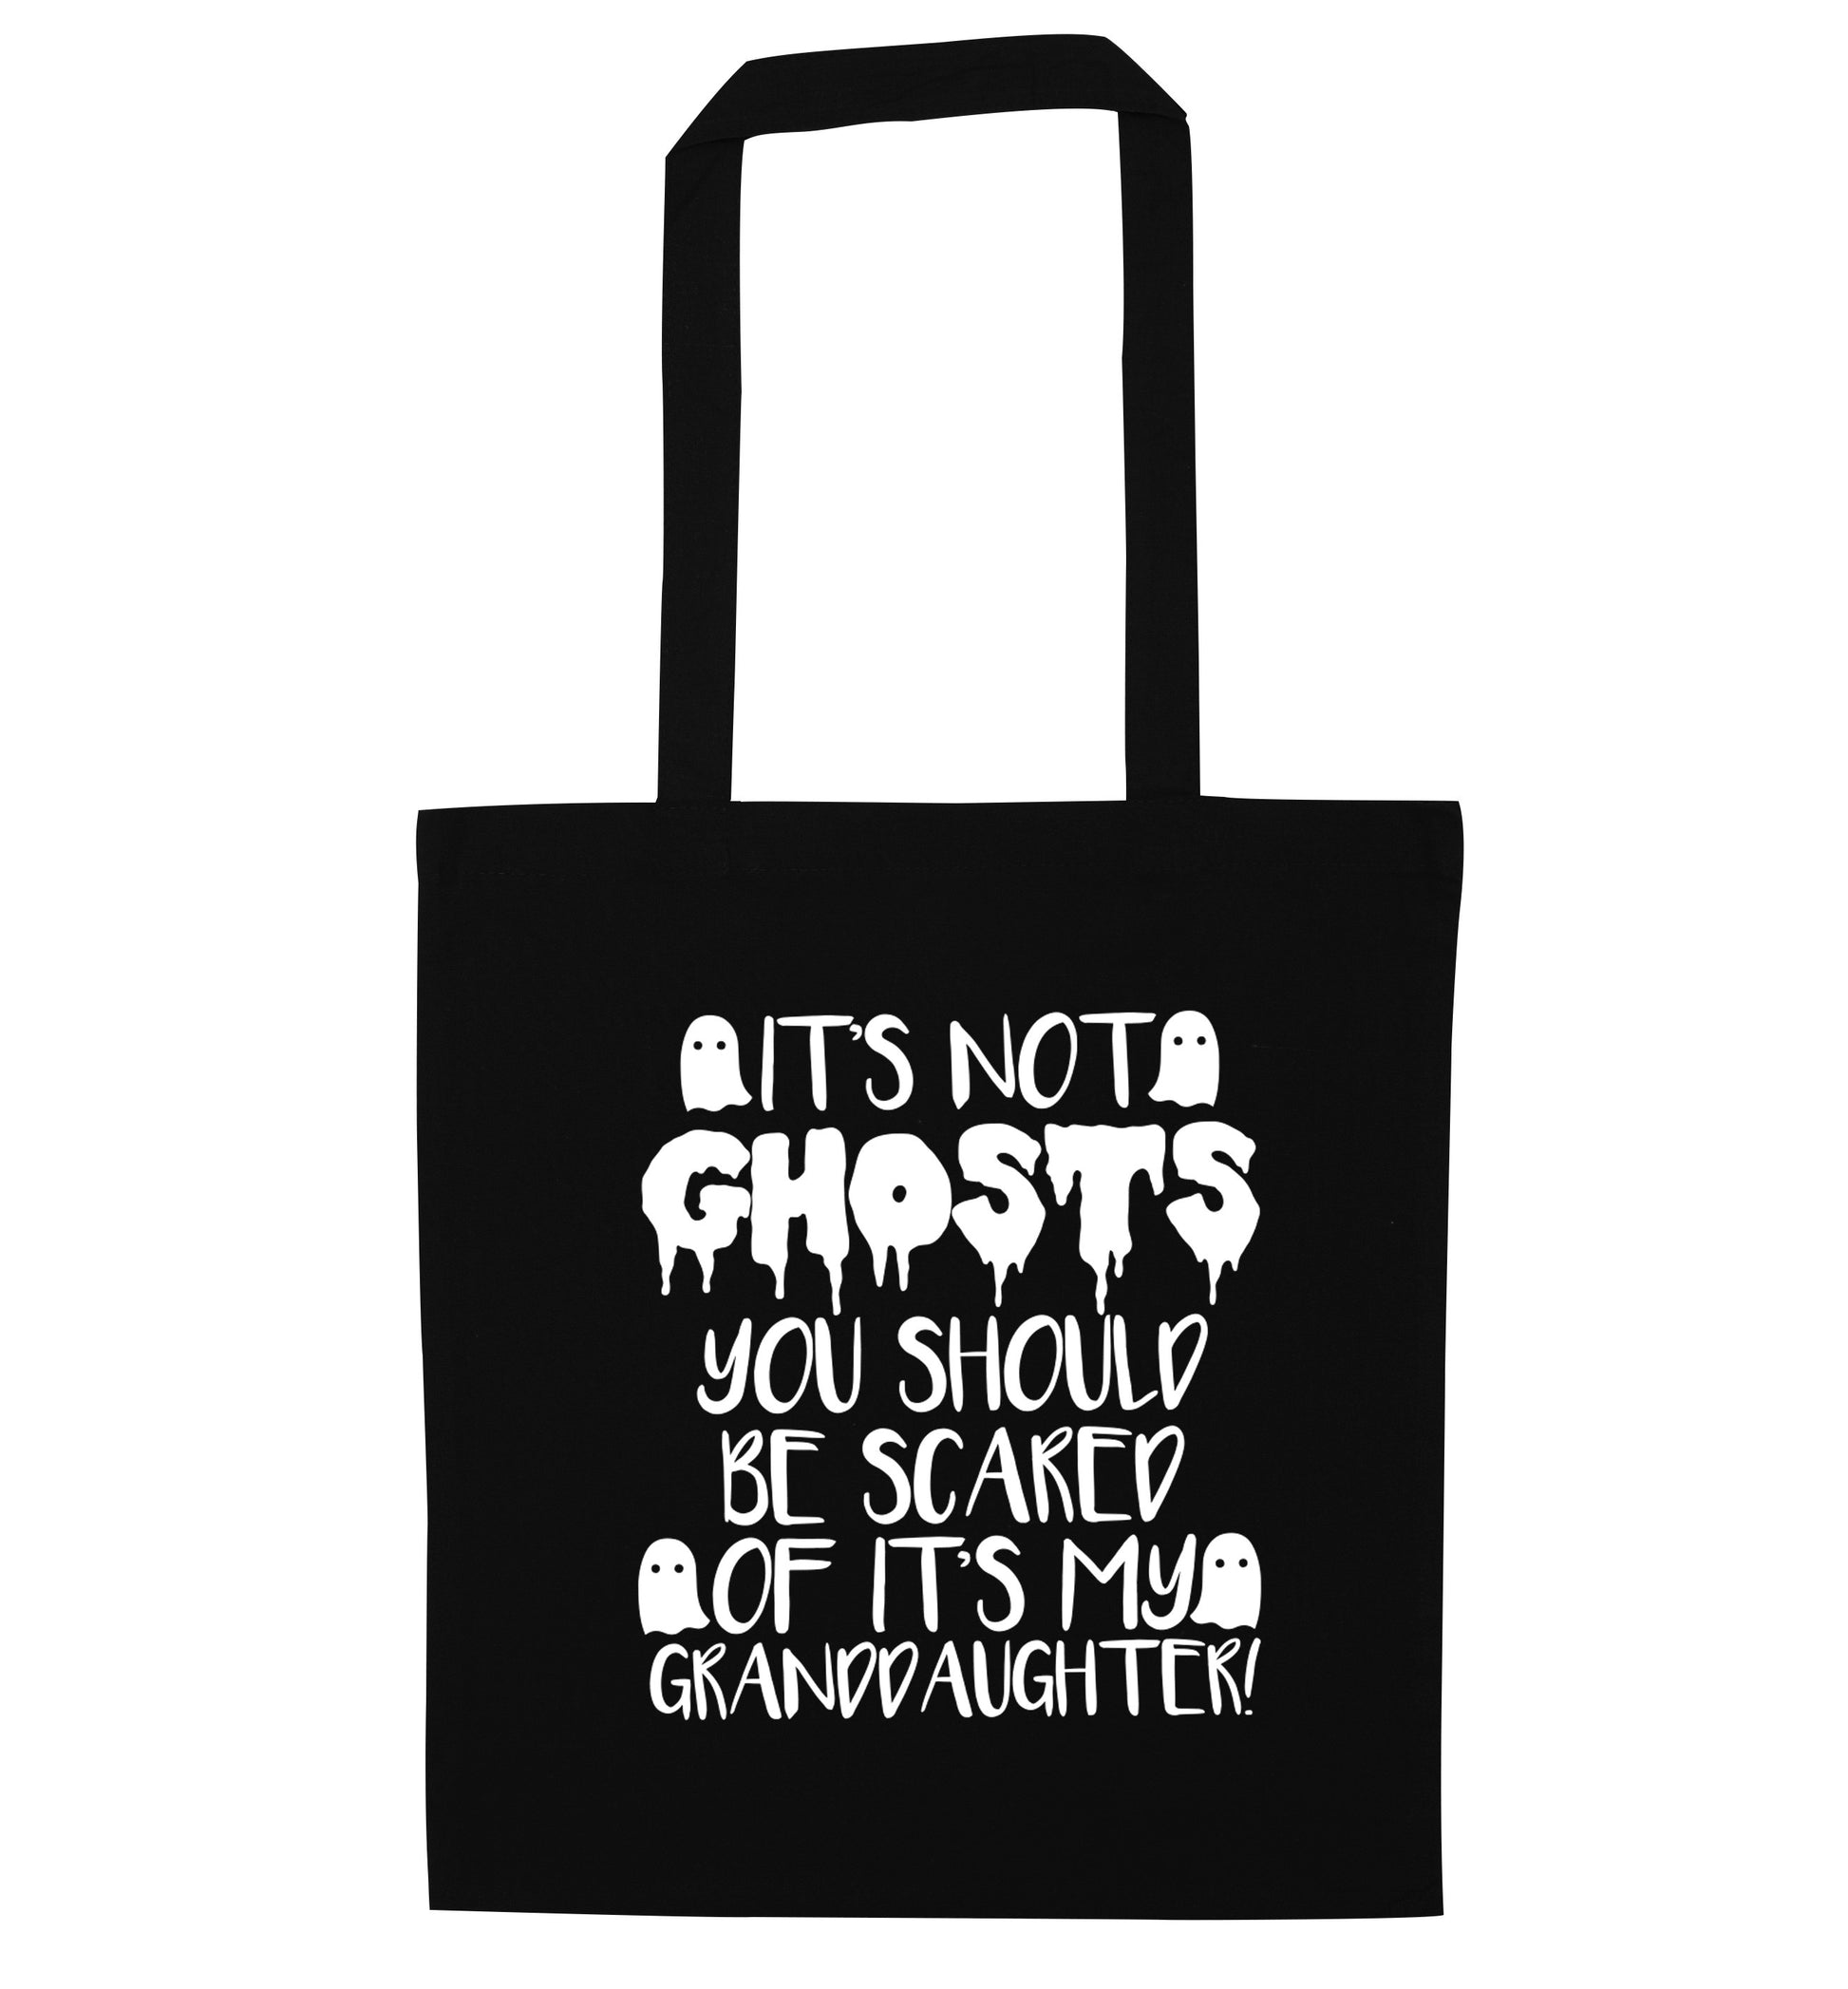 It's not ghosts you should be scared of it's my granddaughter! black tote bag